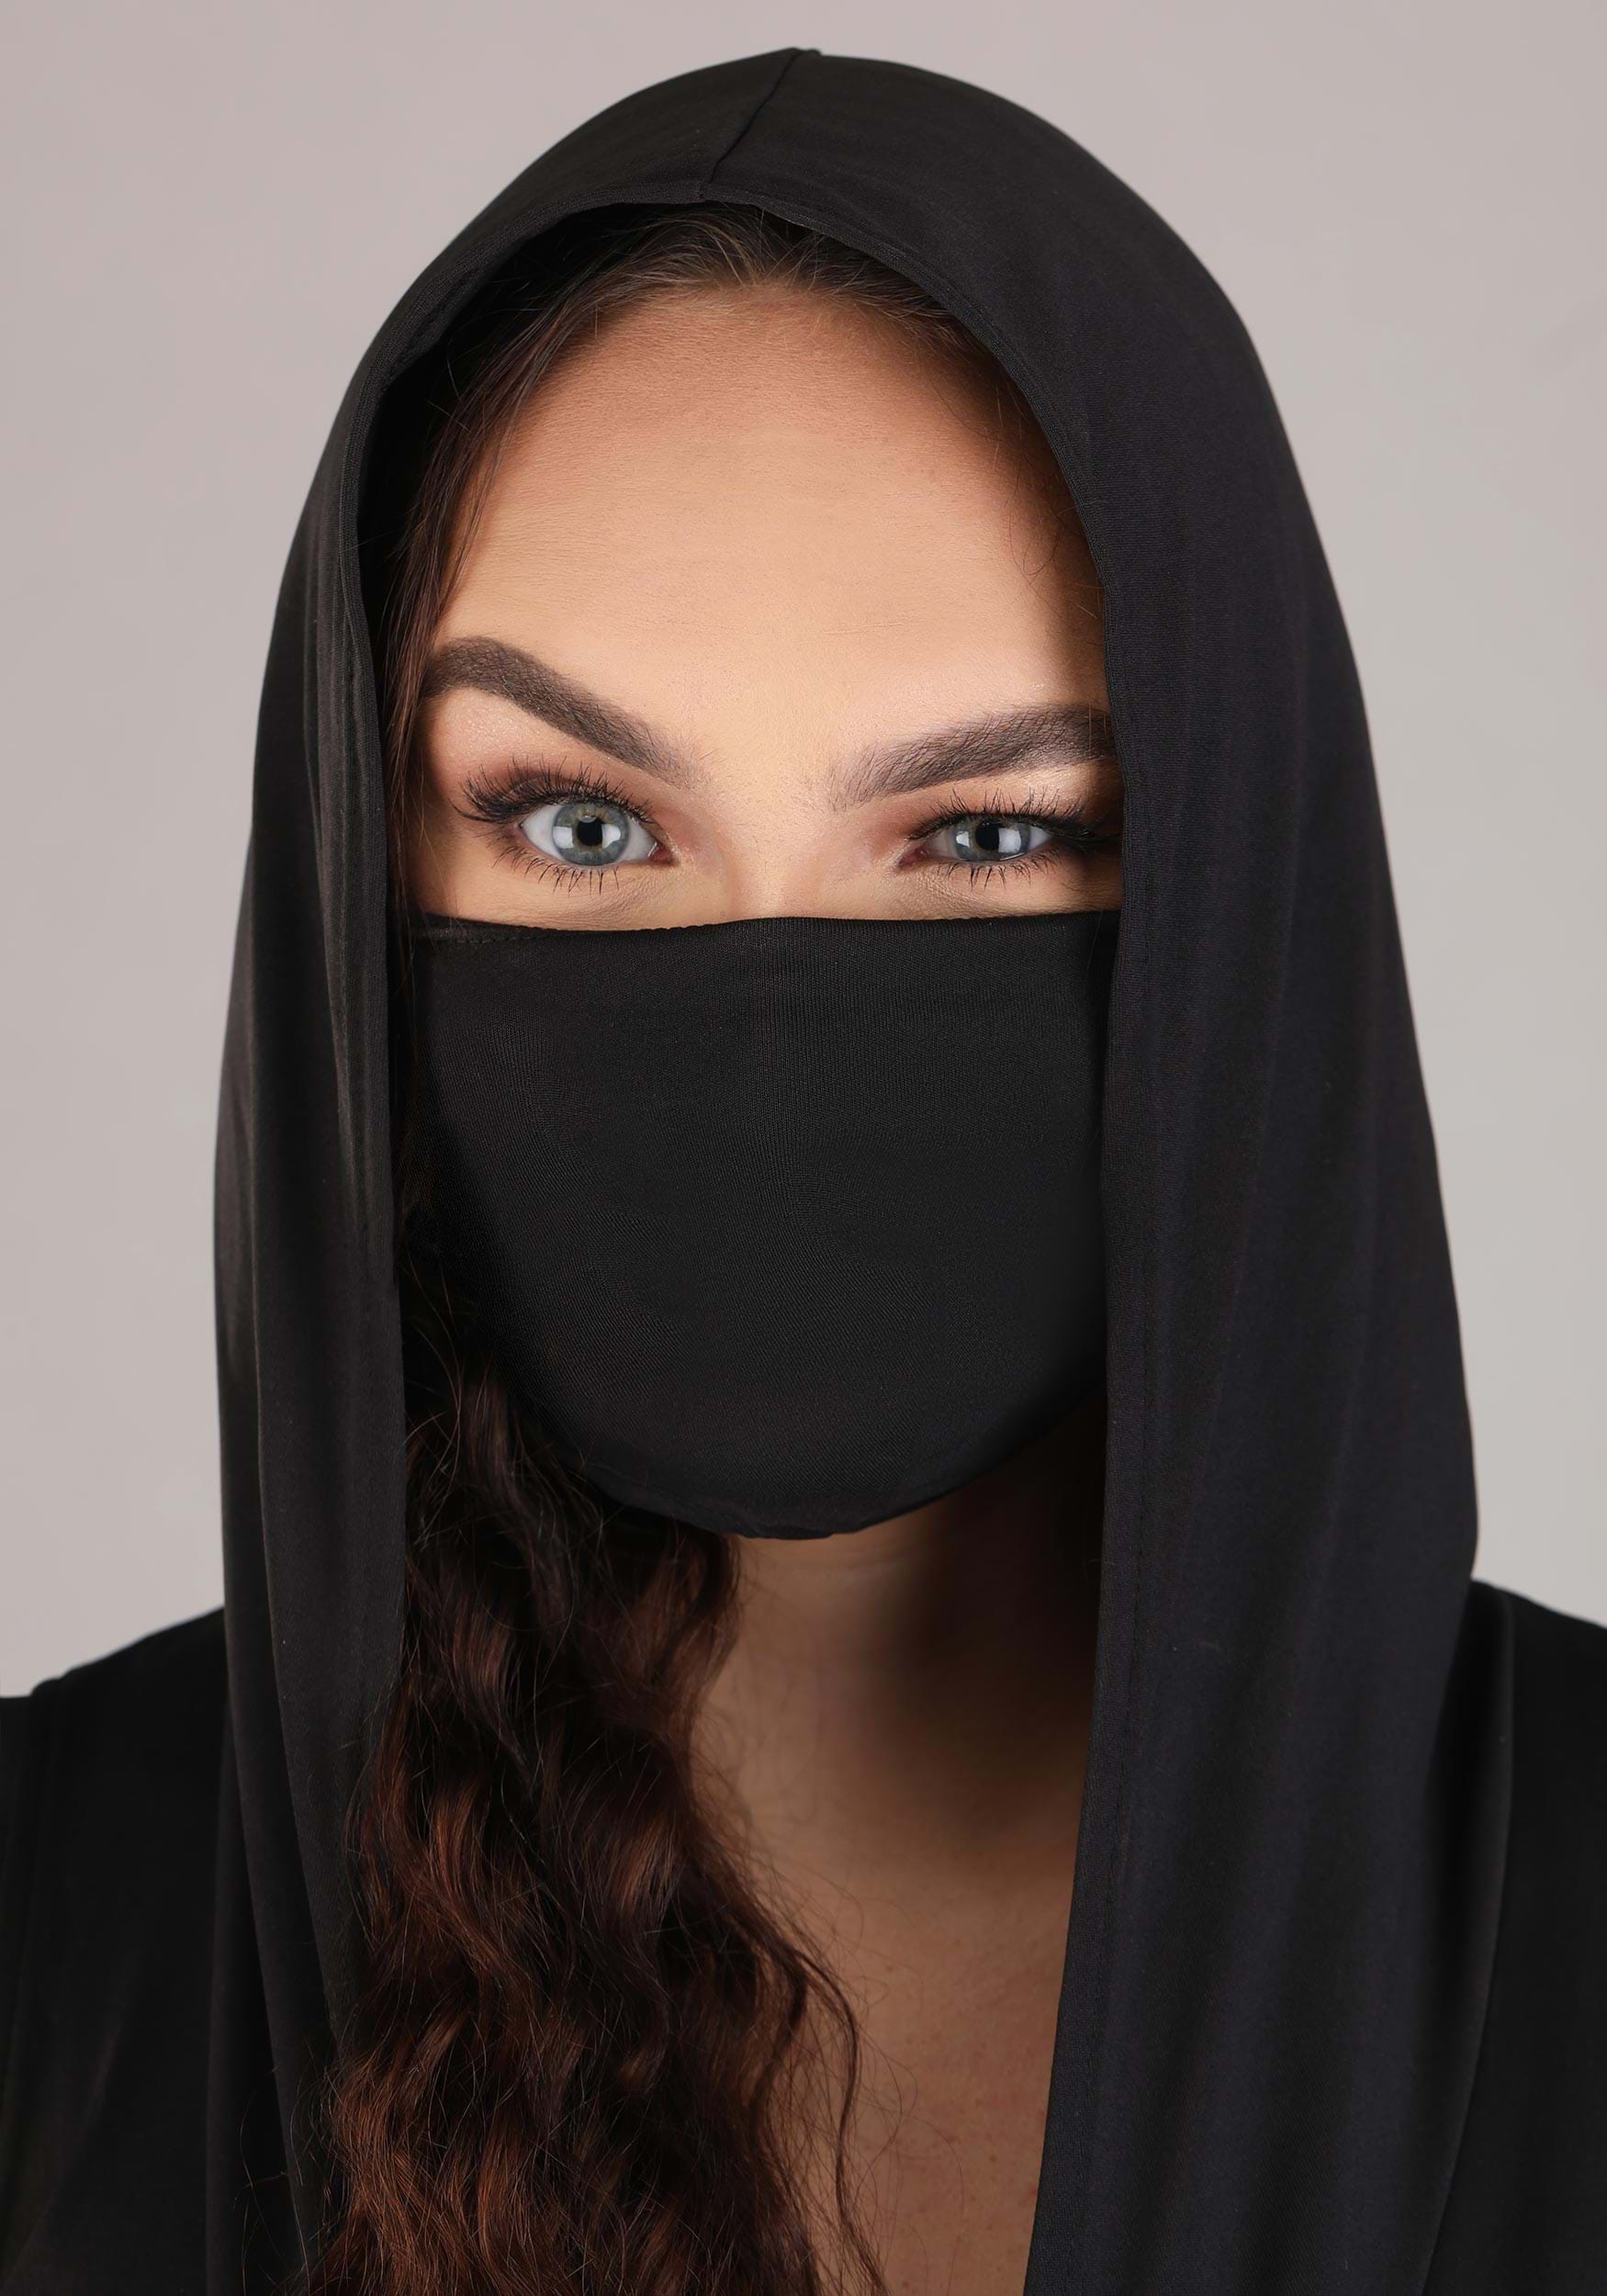 Sexy Deadly Ninja Costume For Women